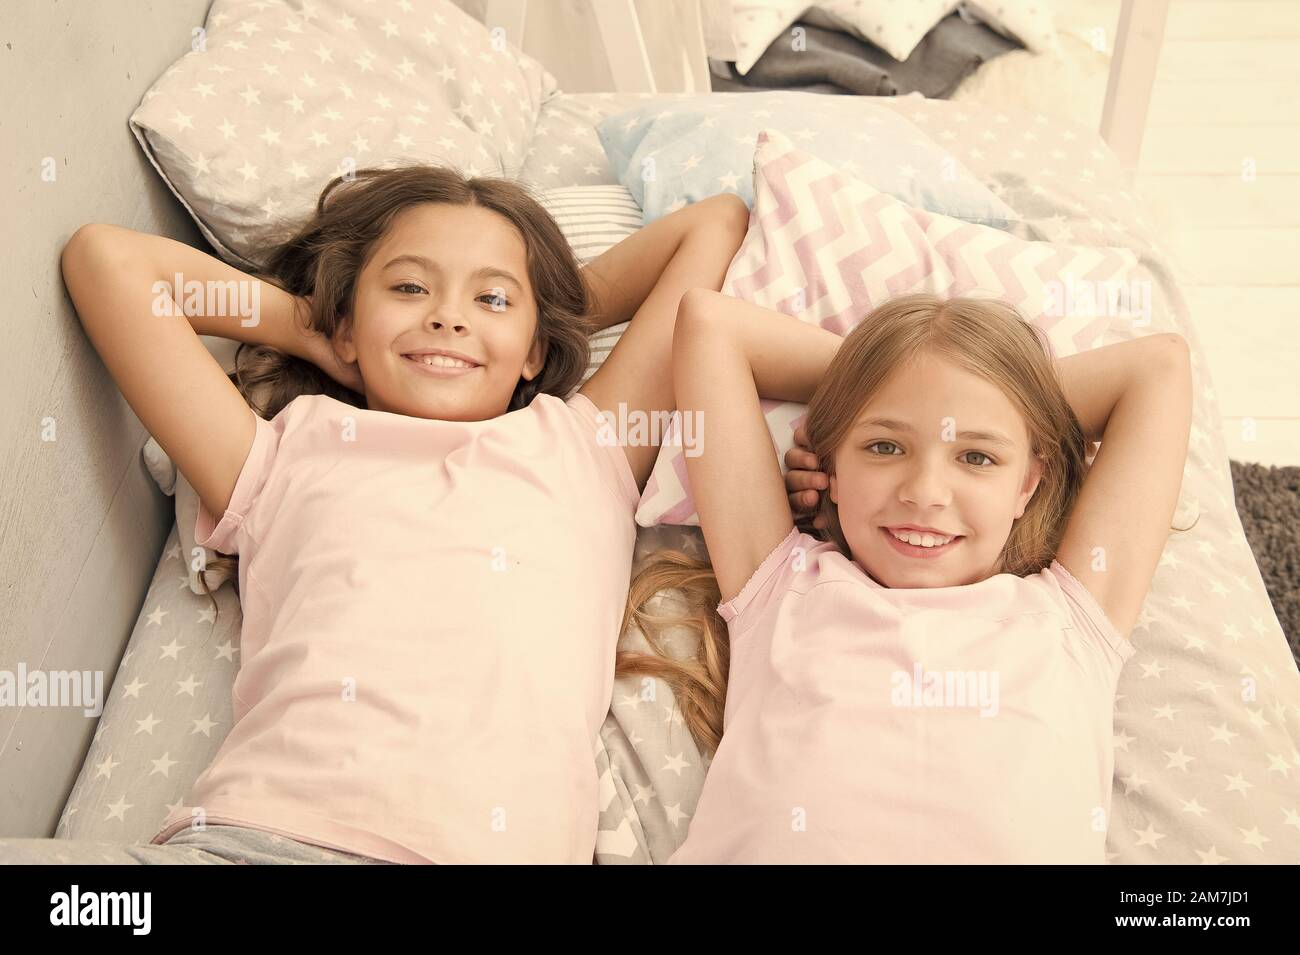 Being as happy as the day is long. Happy little girls having afternoon nap in bedroom. Adorable small children relaxing on bed. Enjoying happy childhood. Carefree and happy. Stock Photo